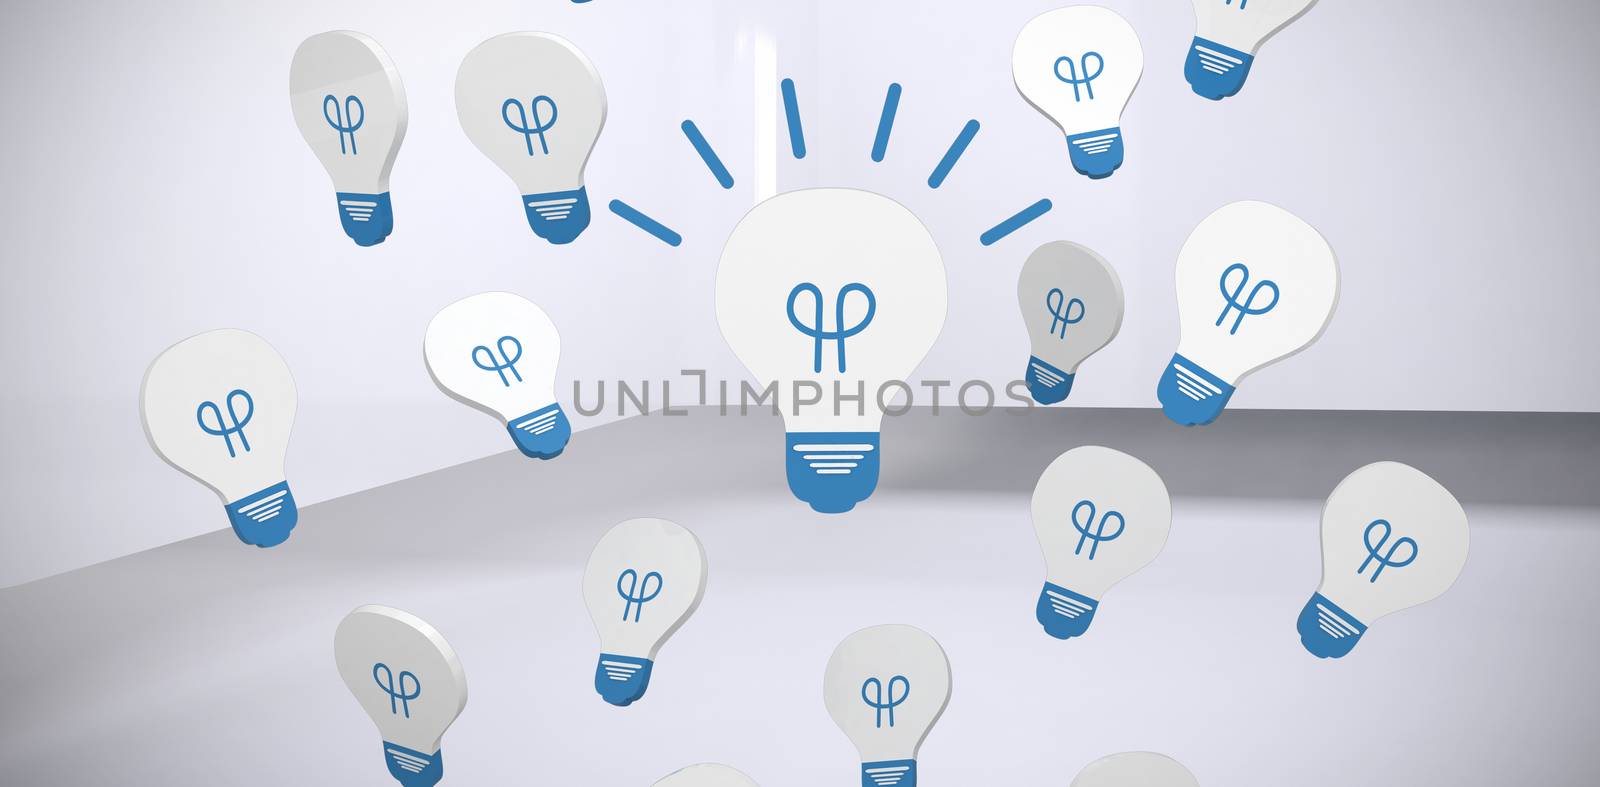 Composite image of glowing light bulb icon by Wavebreakmedia